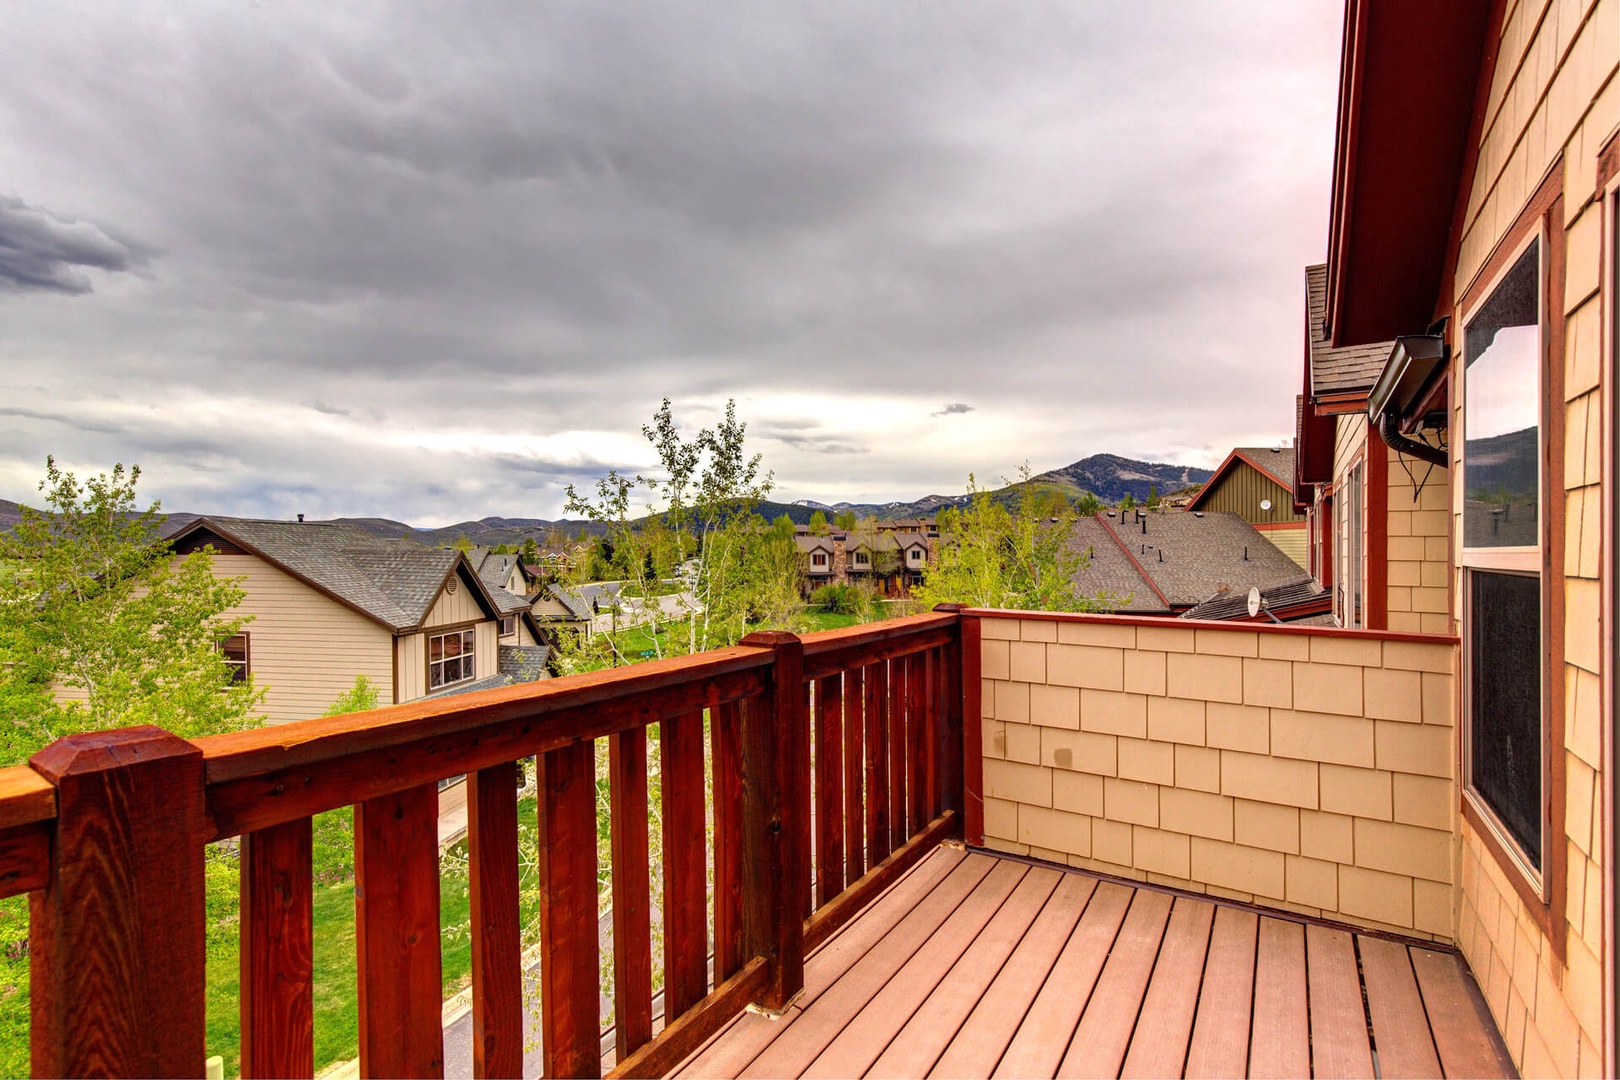 Bear Hollow Village 5610: Master Bedroom Private Balcony. Look at those views!